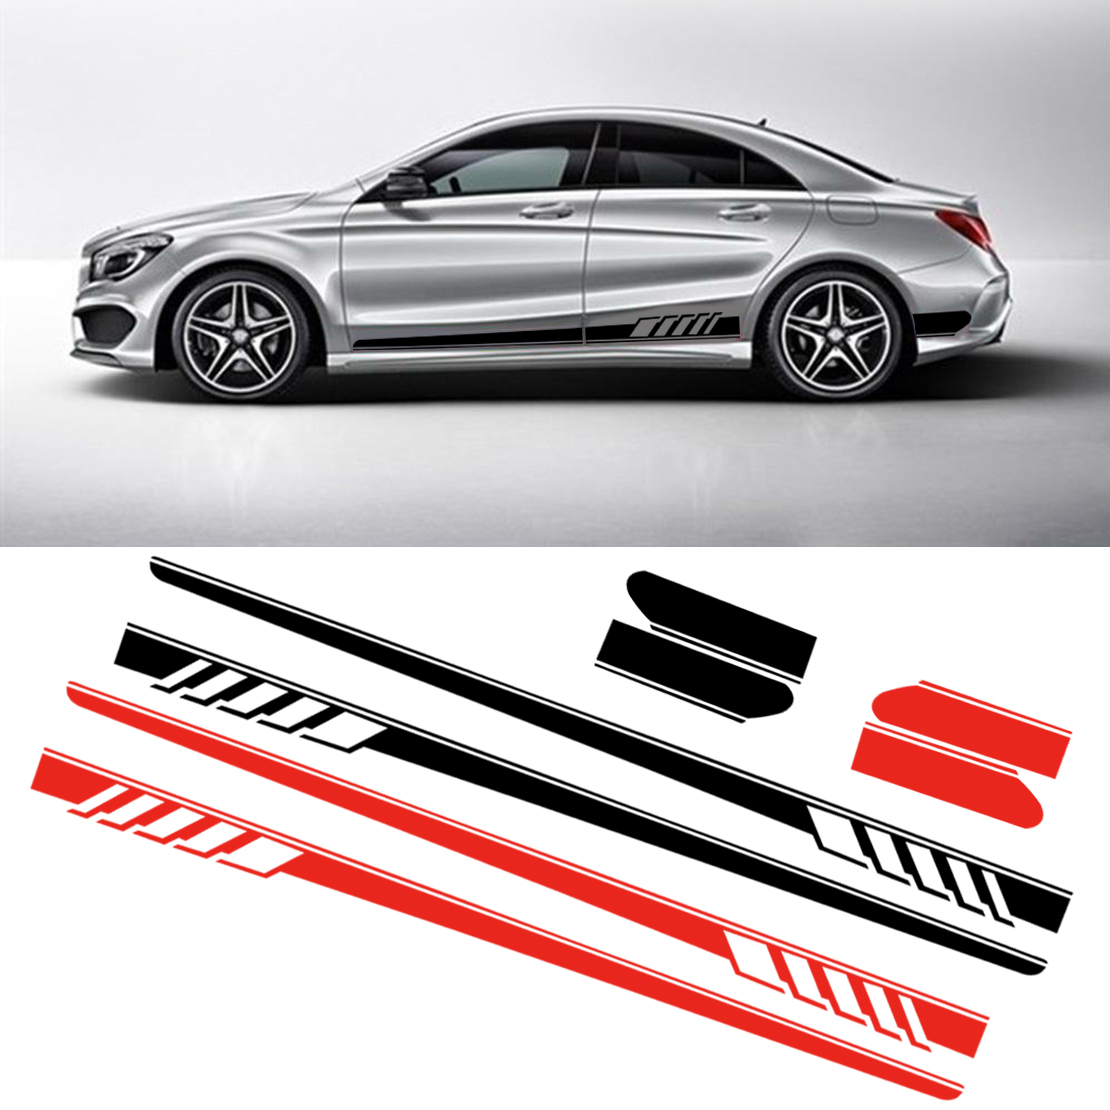 Racing Auto Decal Vinyl Side Body Sport Stripe Car Sticker Fit For ...